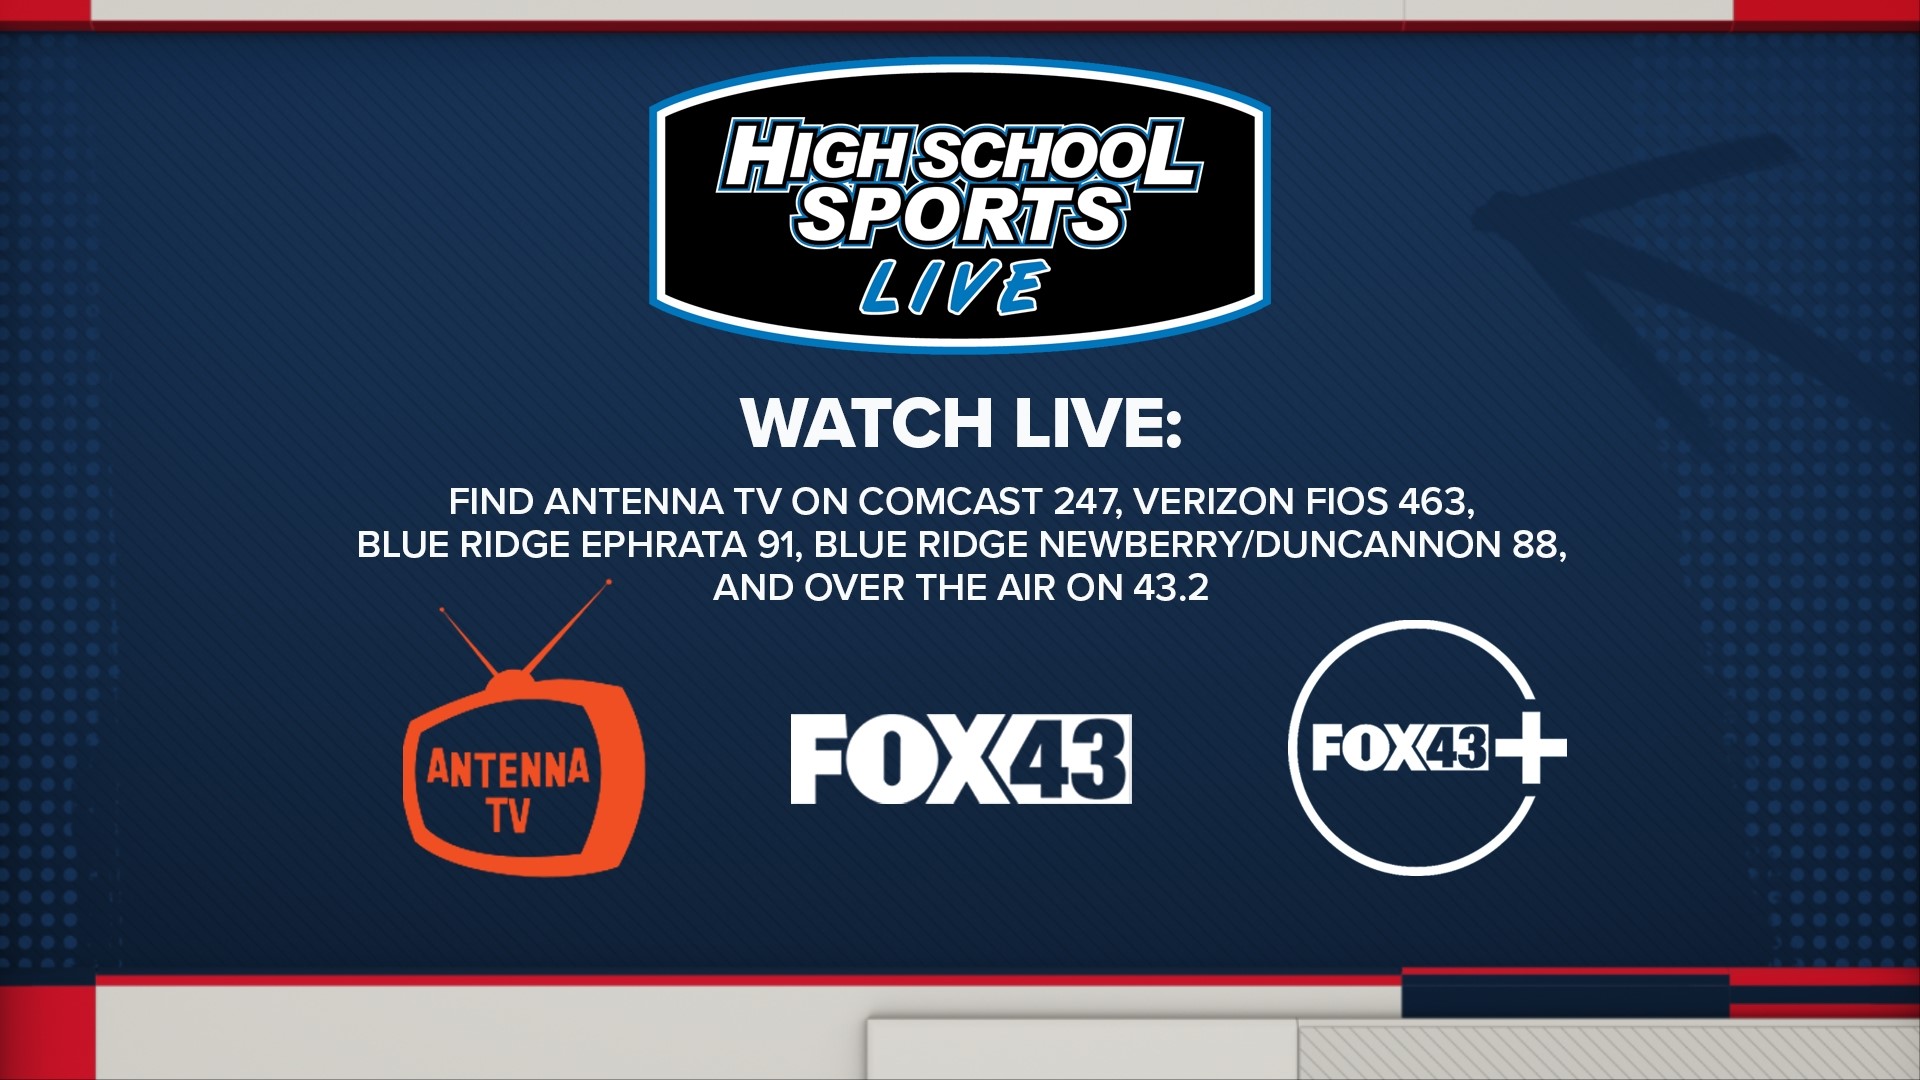 The High School Football Frenzy is partnering with High School Sports Live to enhance the exposure of local student-athletes.